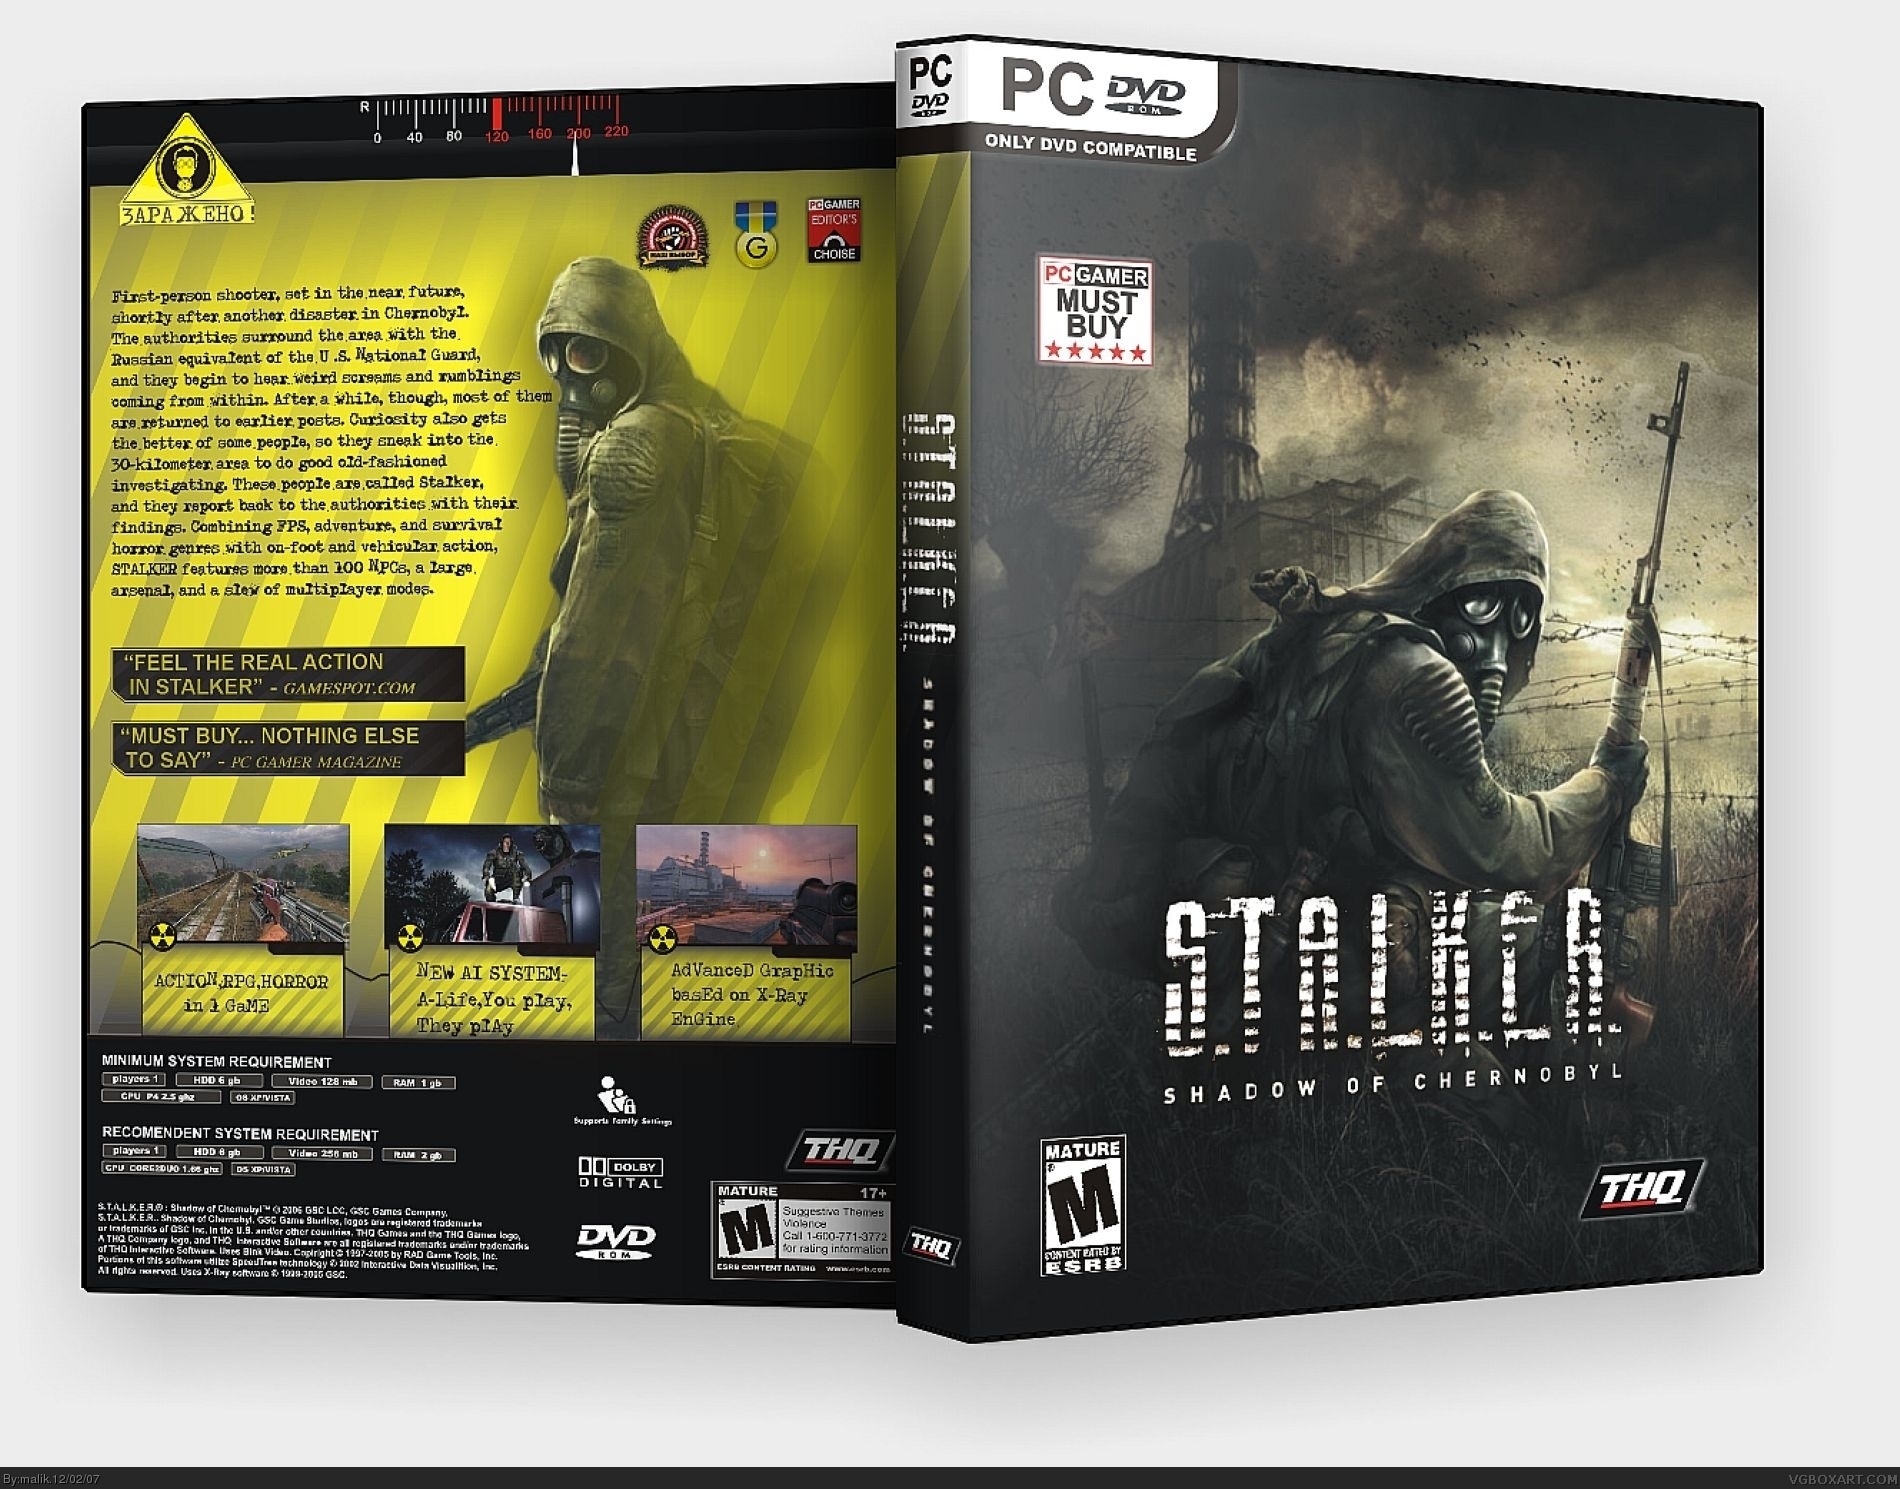 Stalker playstation. Диск сталкер на пс3. Диск на пс4 сталкер. Диск сталкер на Xbox 360. Stalker тень Чернобыля на Xbox 360 диск.